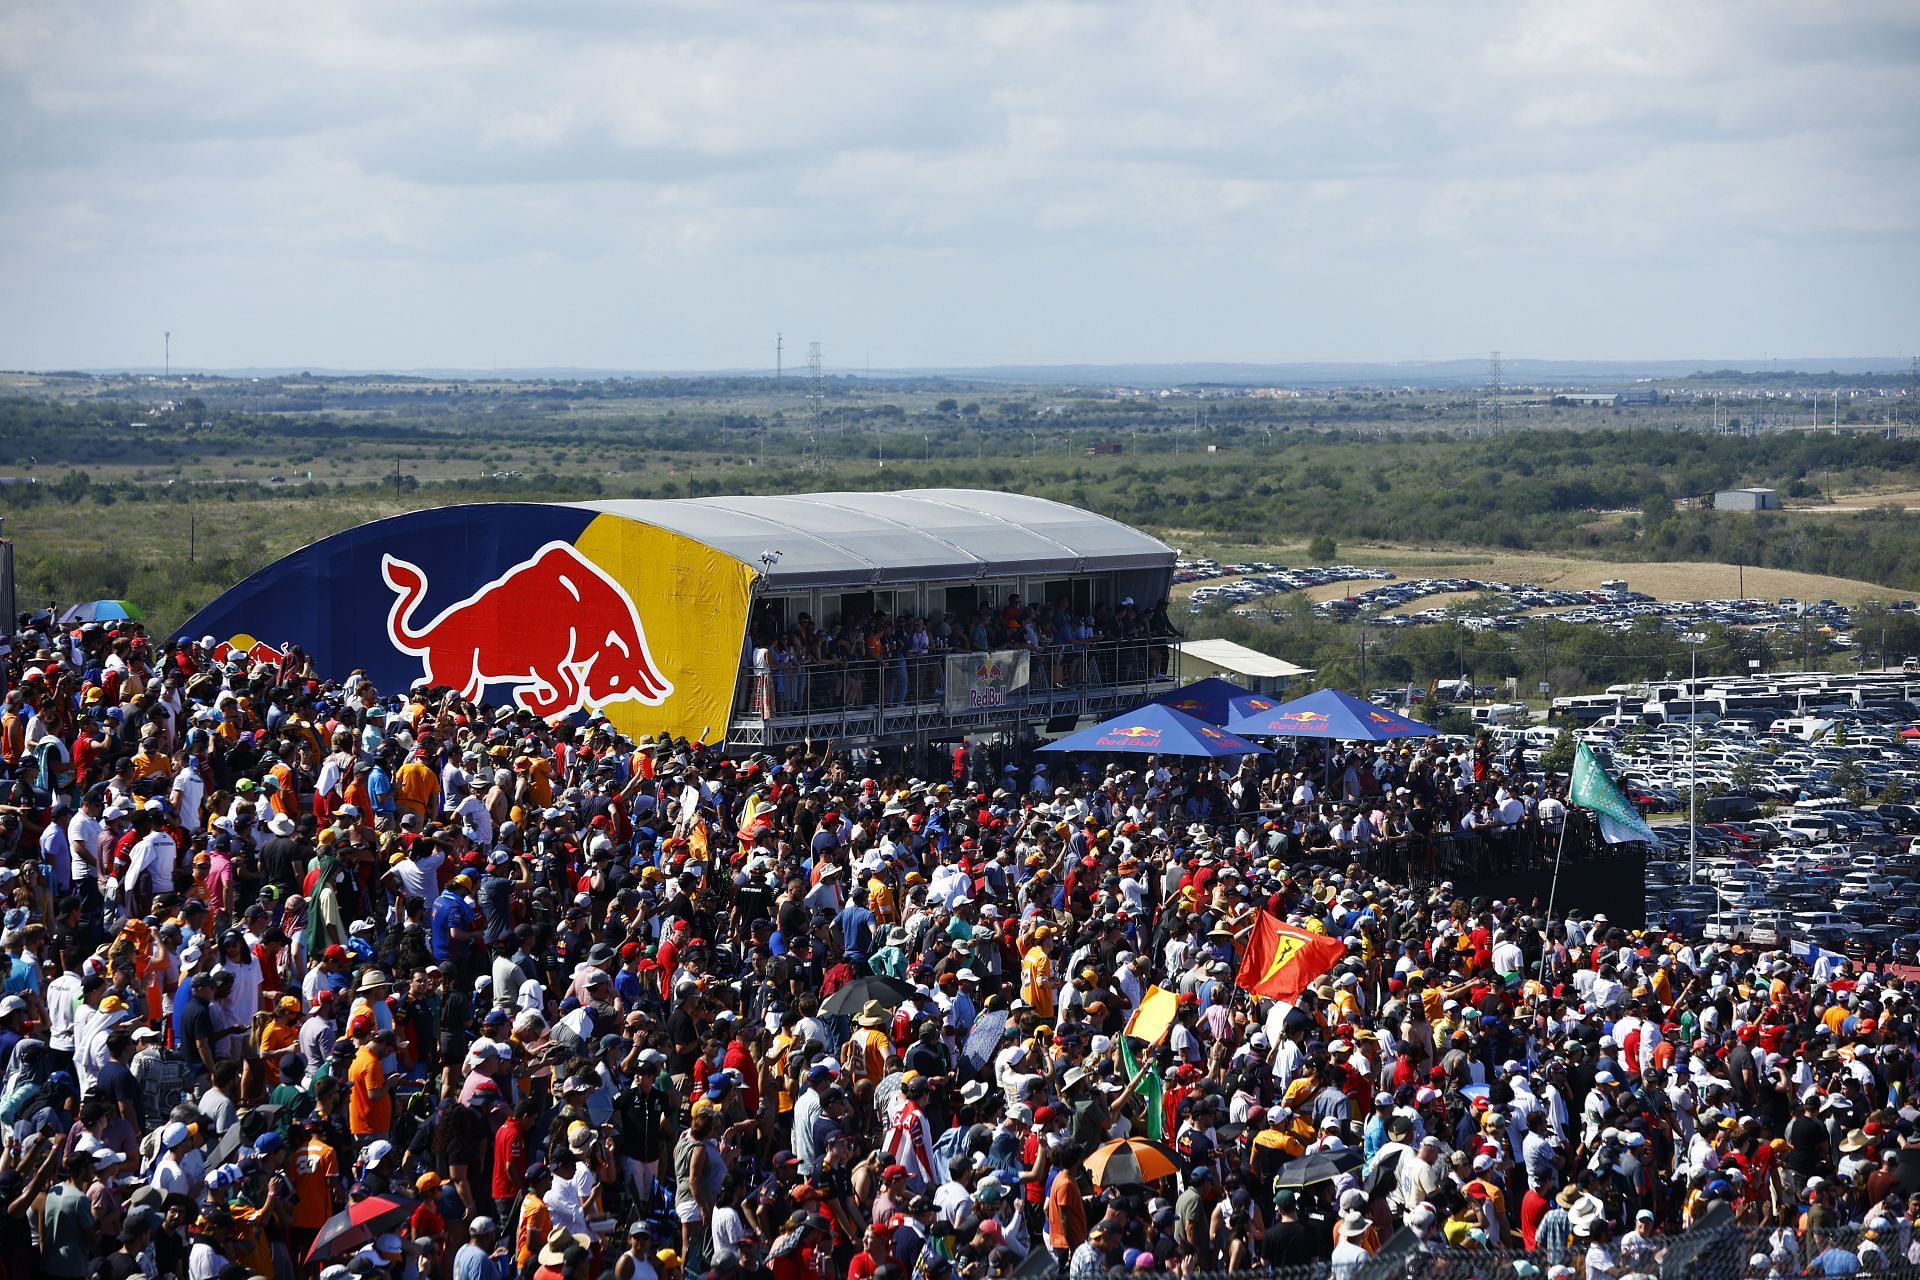 Fans enjoy the atmosphere during the F1 Grand Prix of USA at Circuit of The Americas on October 24, 2021 in Austin, Texas. Red Bull Racing (Photo by Jared C. Tilton/Getty Images)